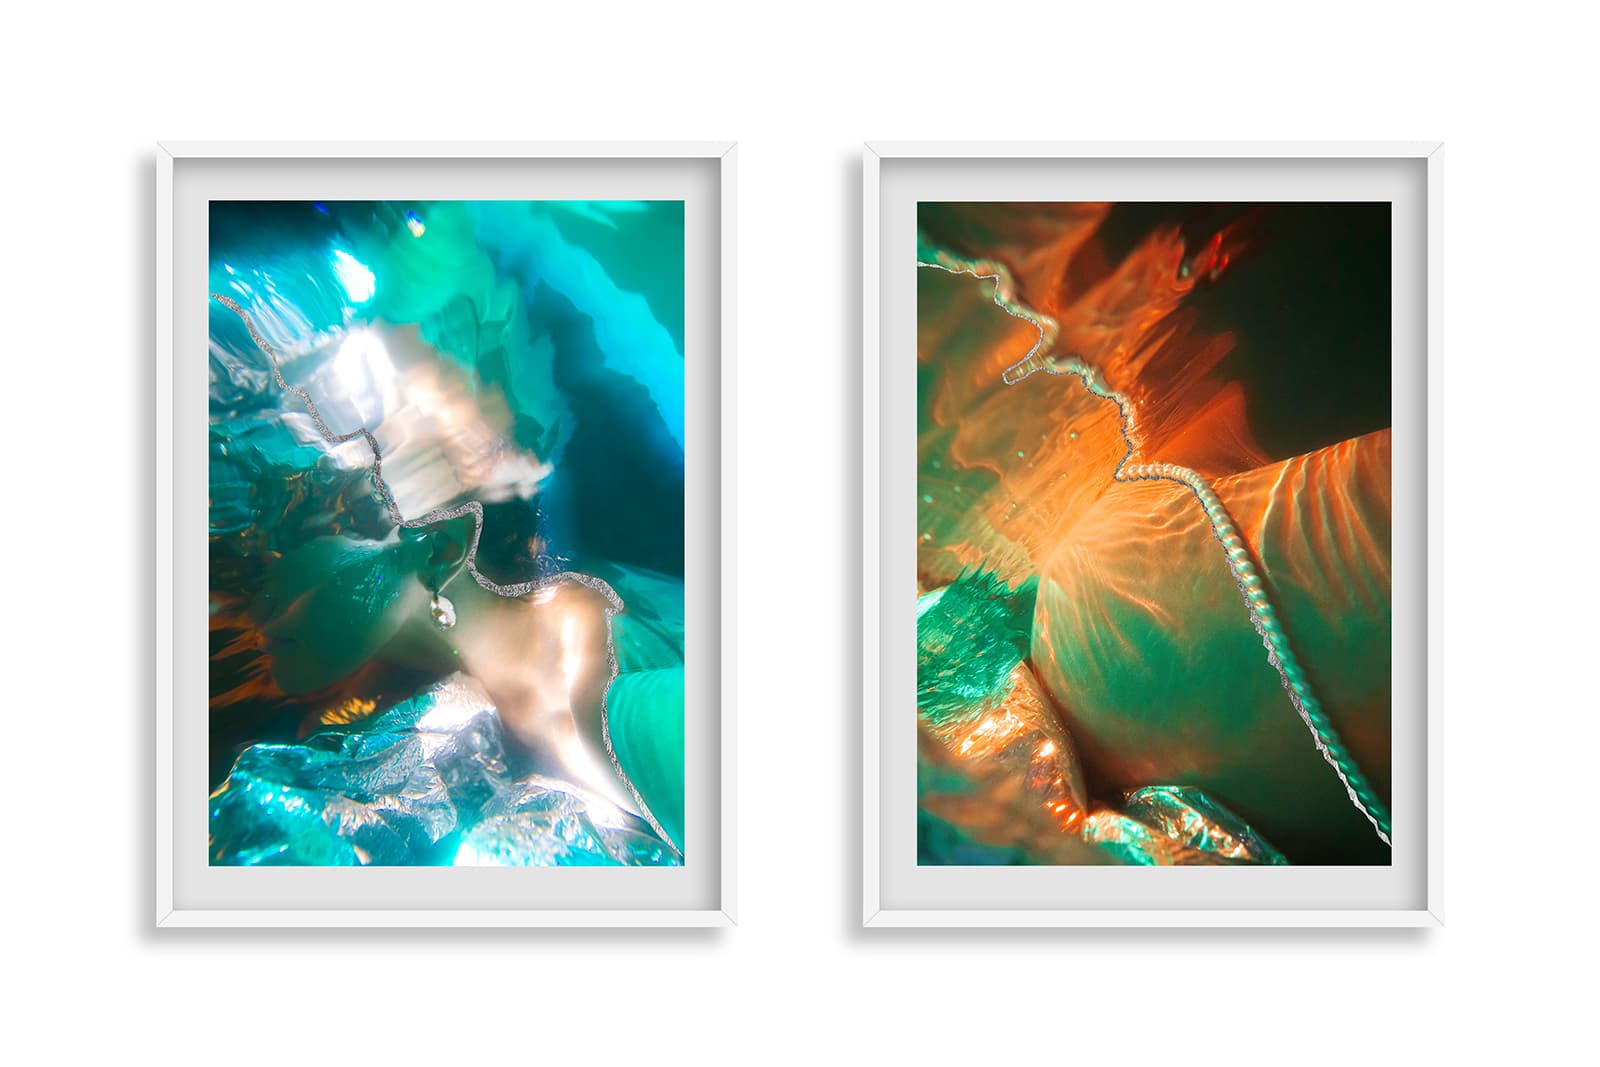 Photo prints by Julia Flit for the FLAIR Project featuring pearls submerged in water